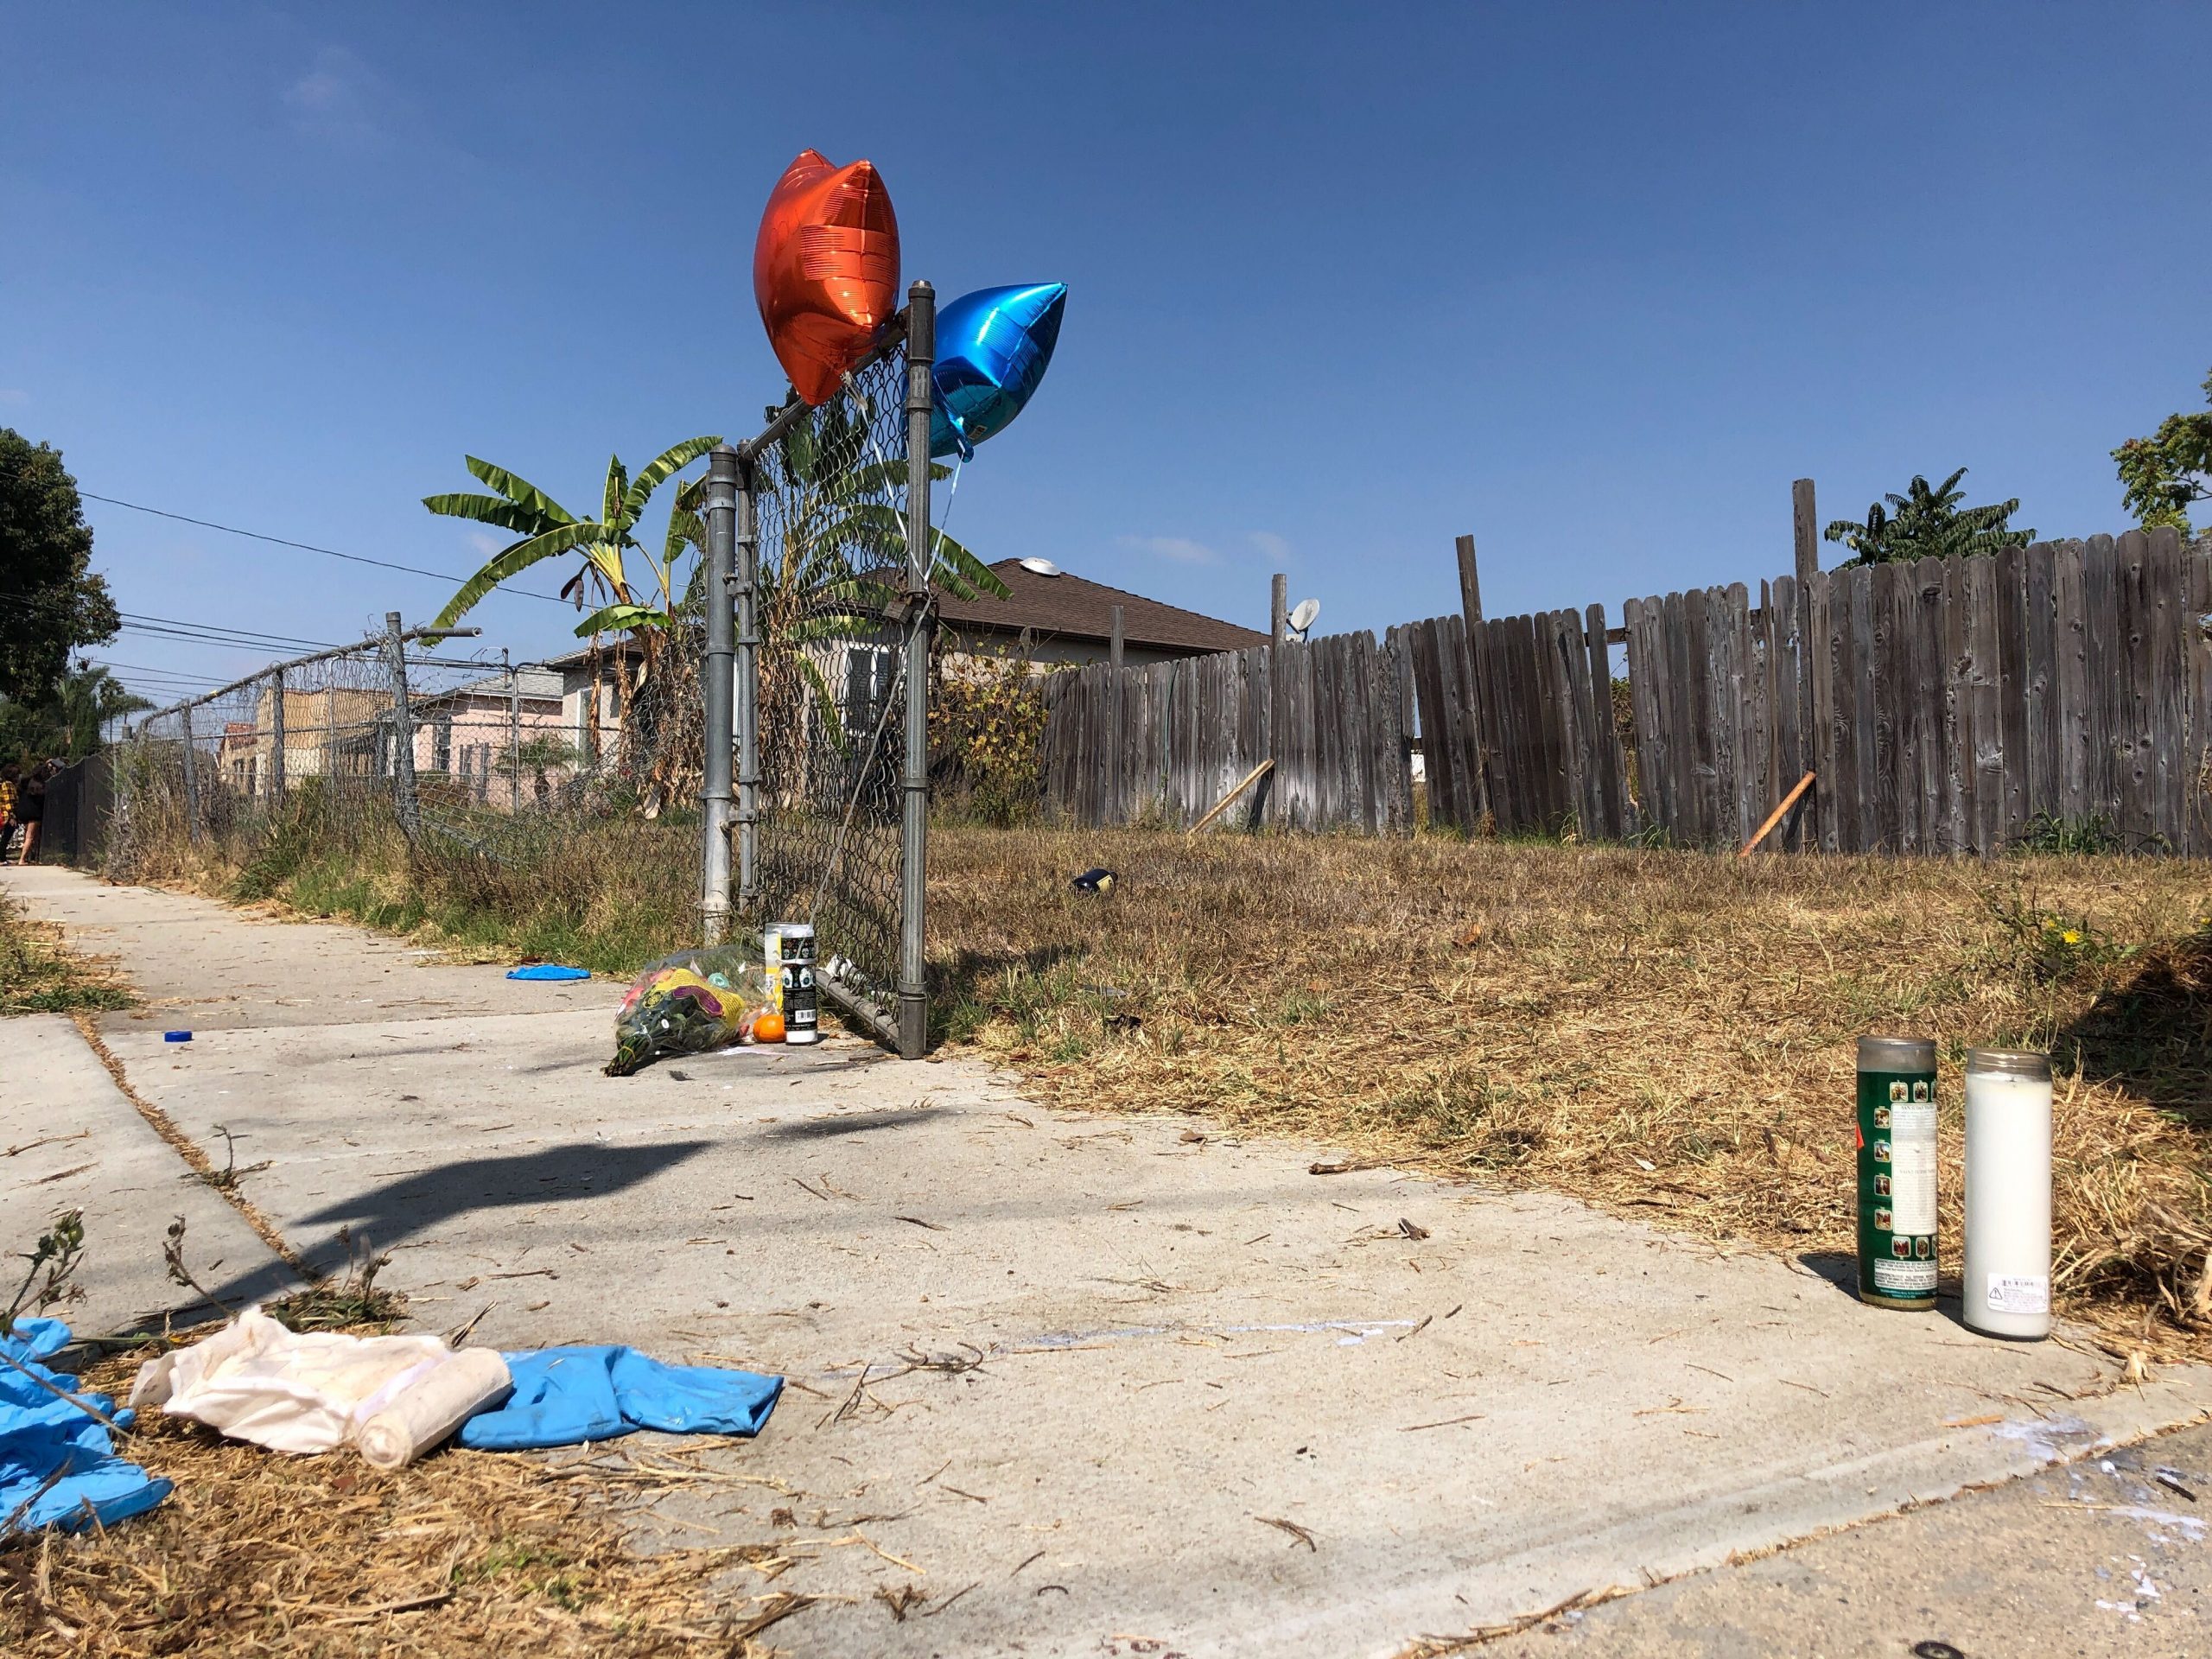 Balloons, candles and flowers are left on Sept. 1, 2020, as a memorial for Dijon Kizzee where he was fatally shot by Los Angeles Sheriff's deputies in the Westmont section of Los Angeles.